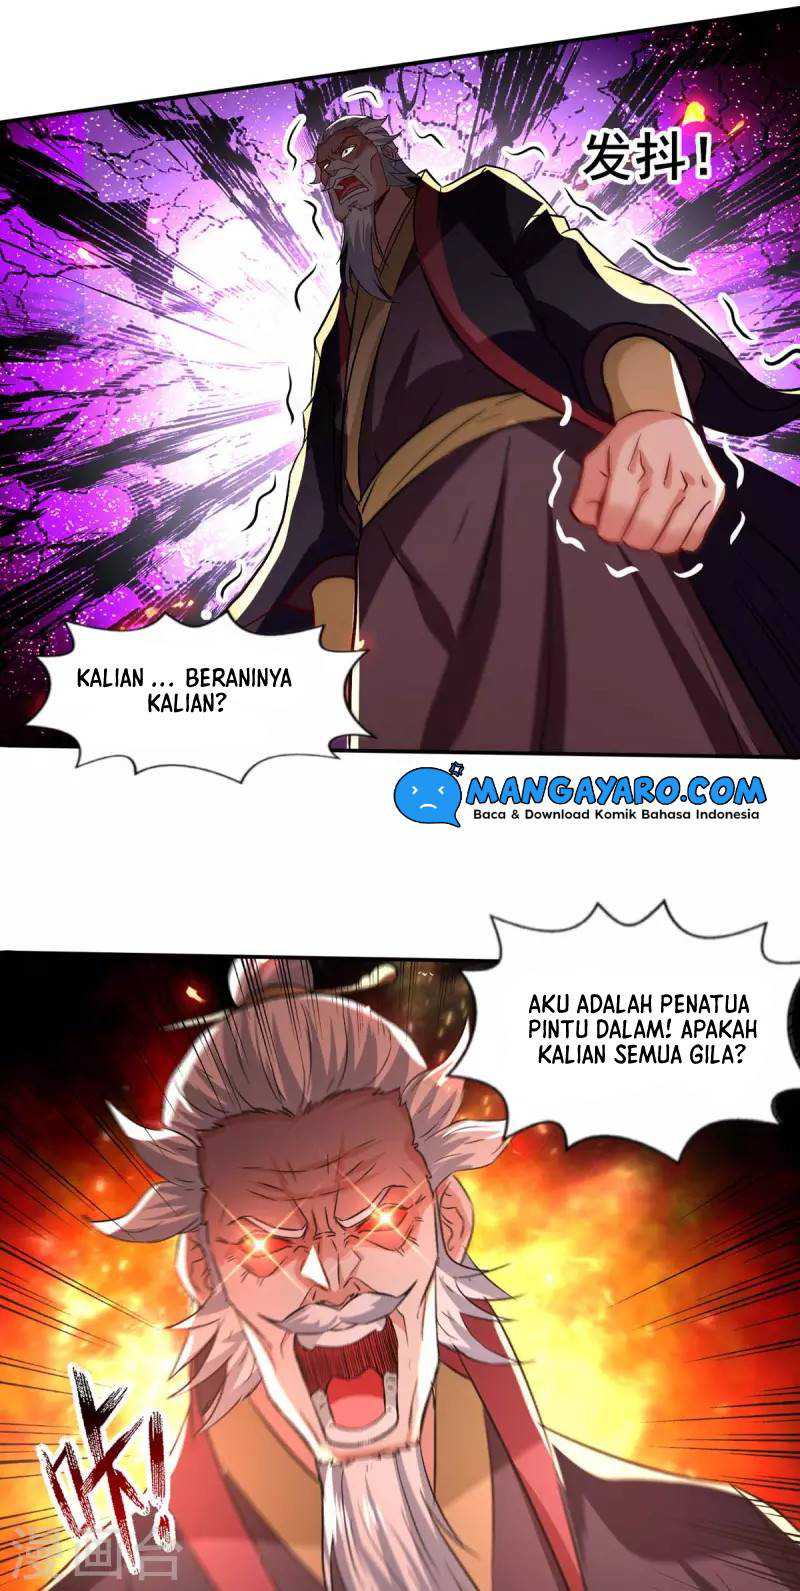 Against The Heaven Supreme (Heaven Guards) Chapter 85 - 161